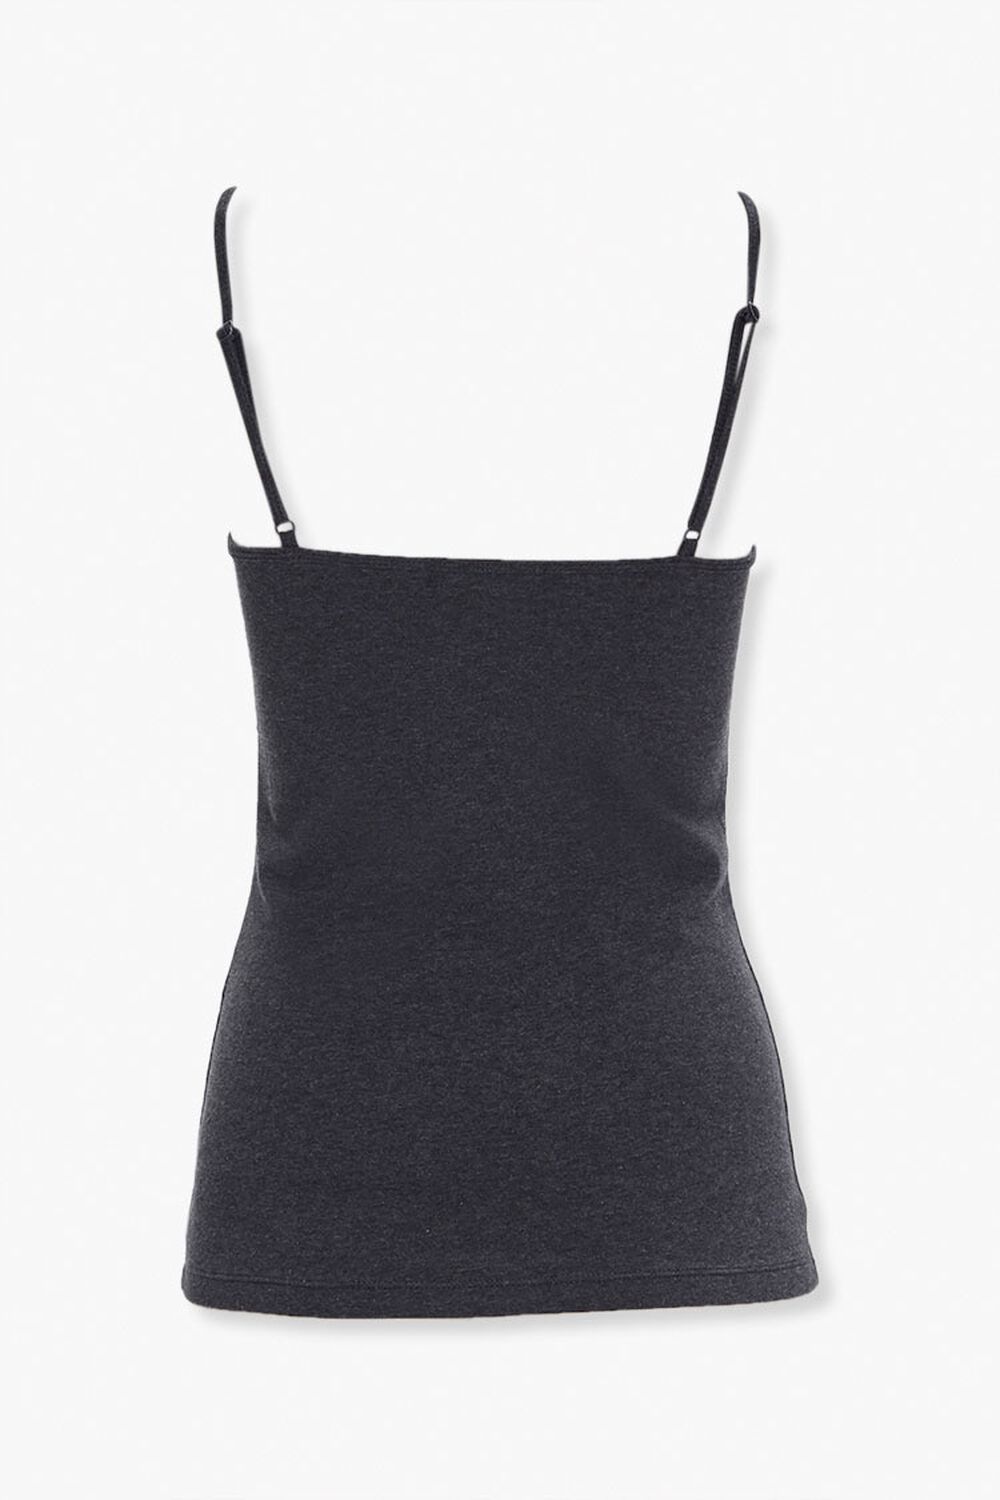 CHARCOAL HEATHER Basic Cotton-Blend Cami, image 3